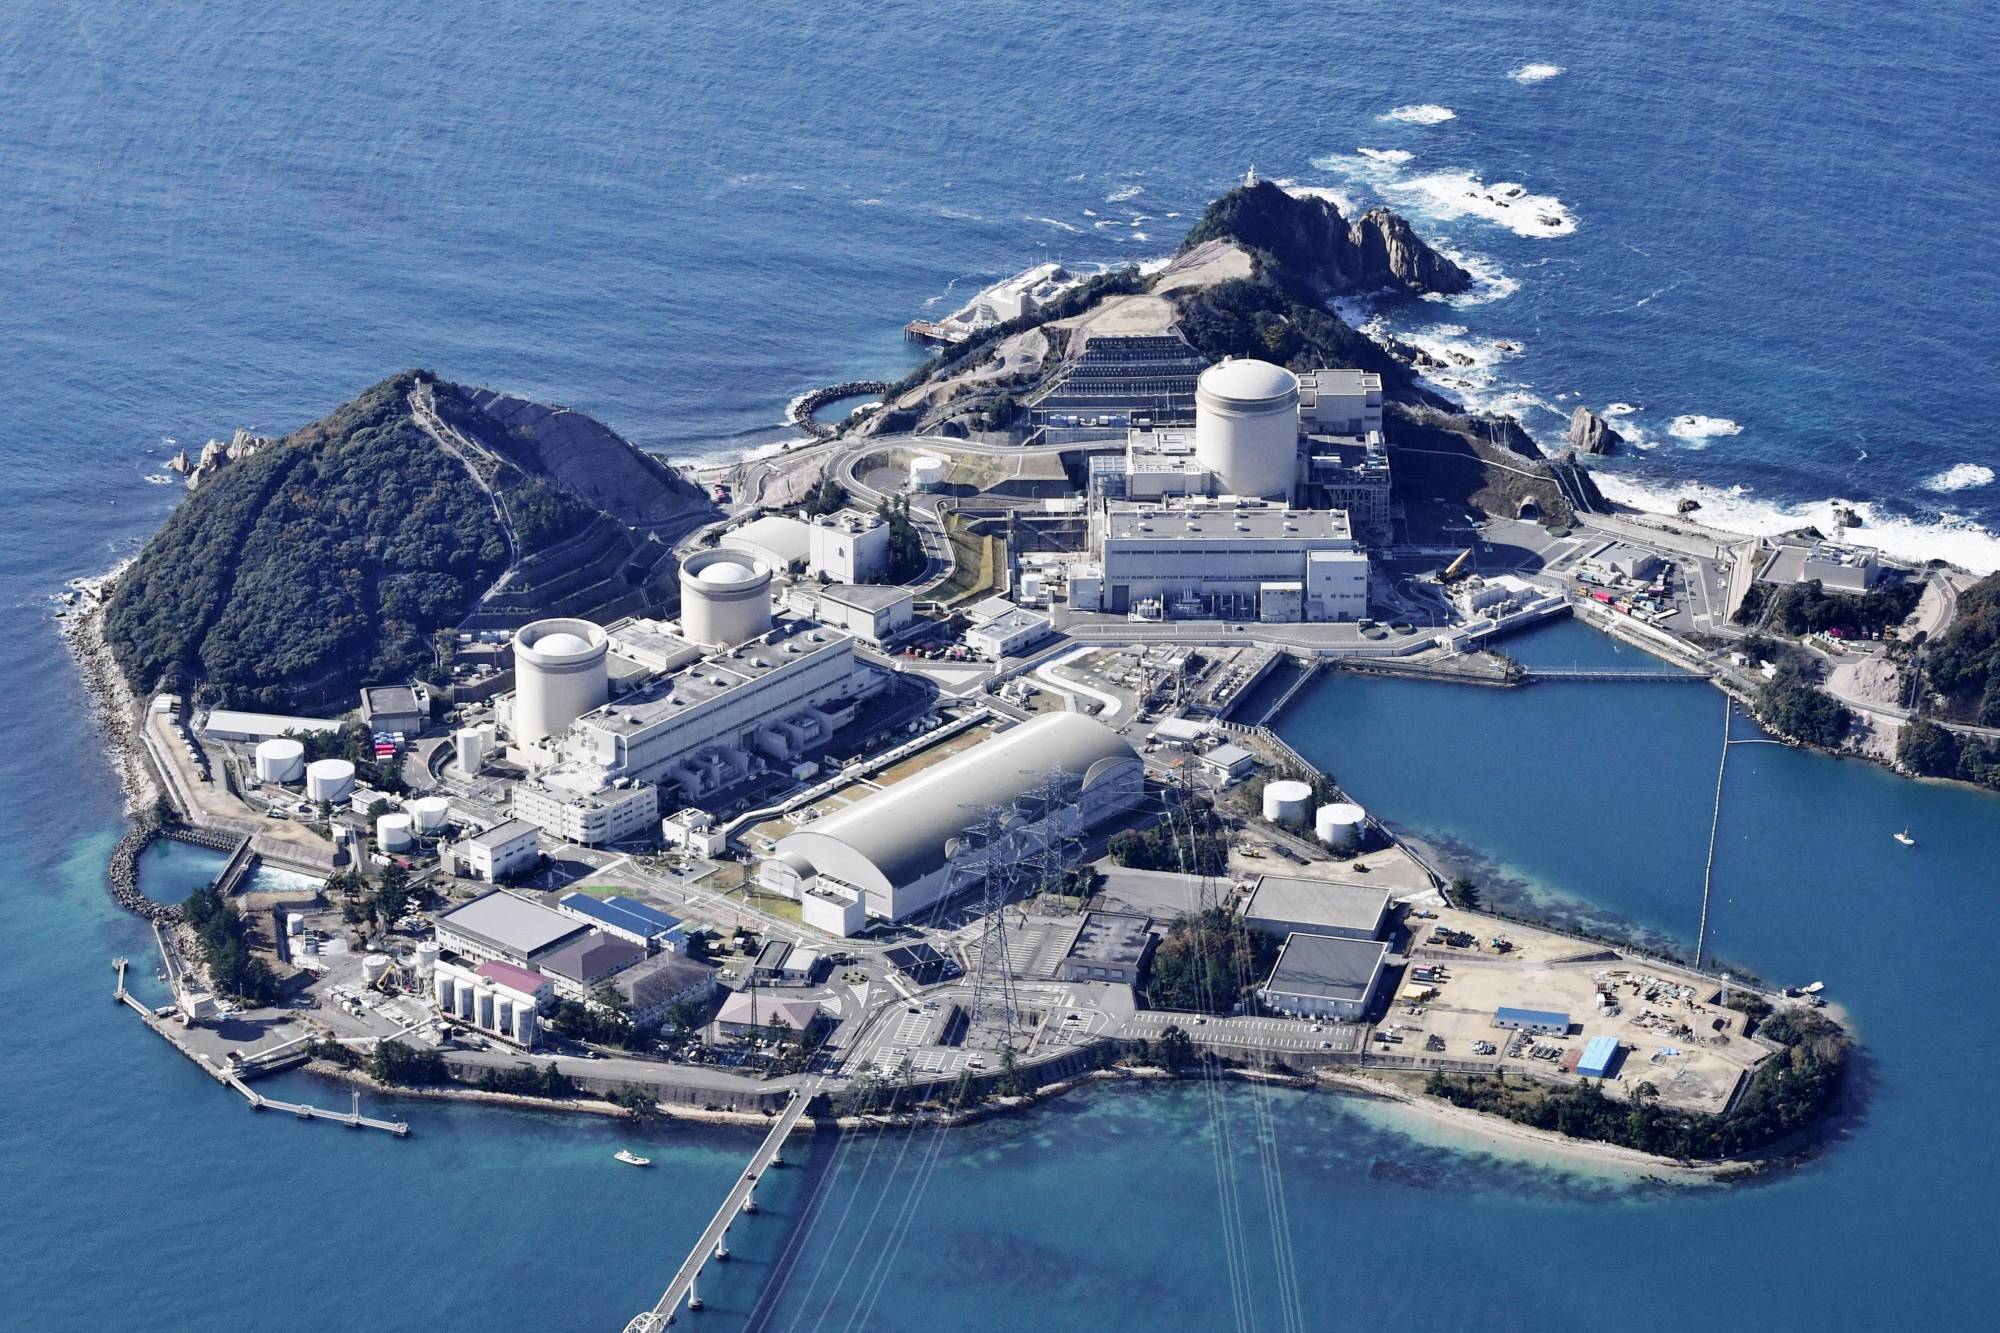 Kansai Electric Power Co.'s Mihama nuclear power station in Fukui Prefecture | KYODO